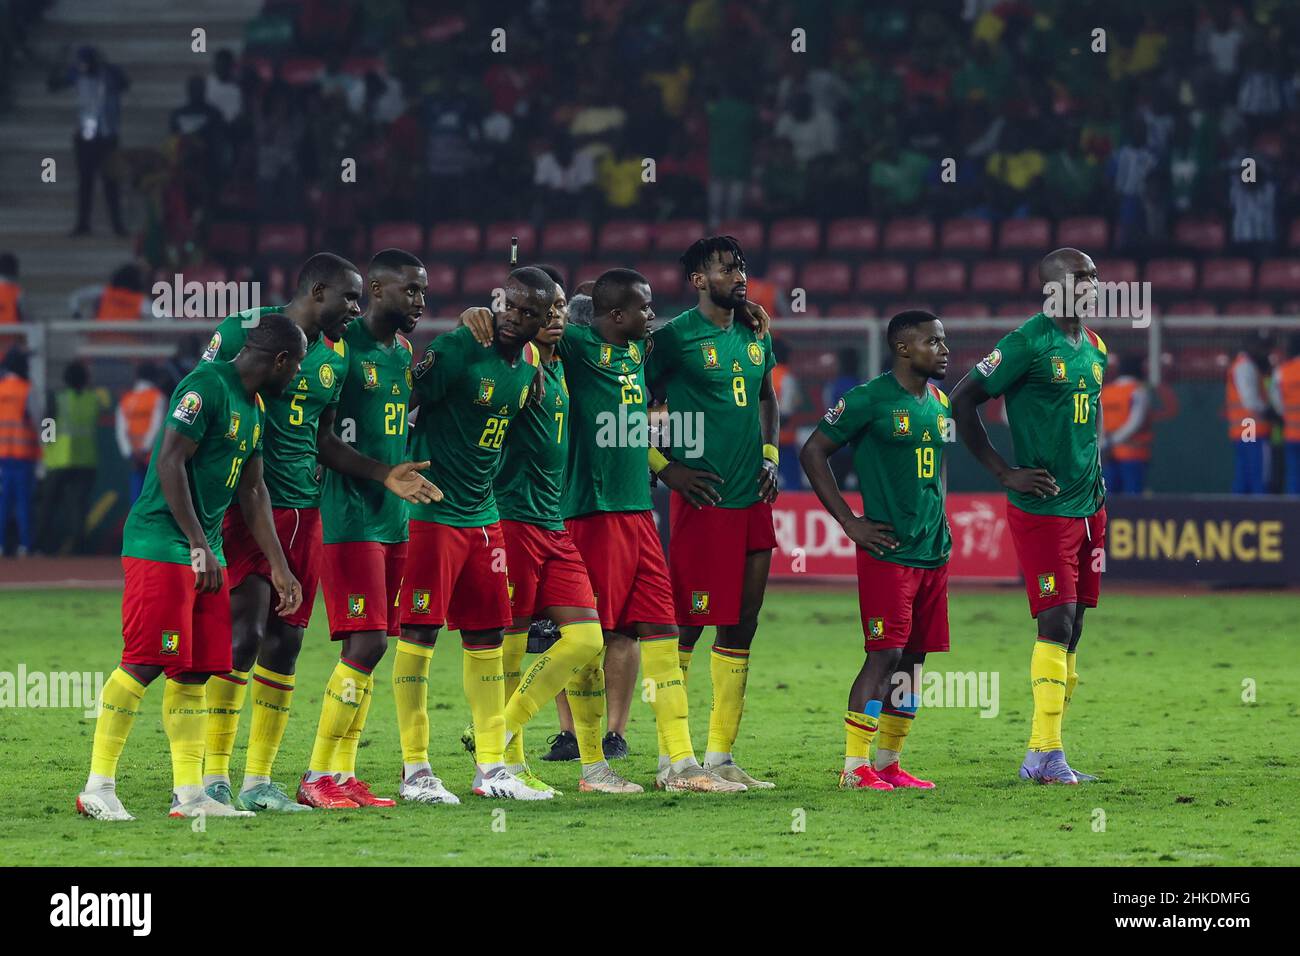 CAMEROON, Yaounde, 03 February 2022 - Andre Zambo Anguissa, Vincent Aboubakar, Karl Toko Ekambi, Nouhou Tolo, Michael Ngadeu, James Lea Siliki, Jean Onana, Collins Fai of Cameroon during the Africa Cup of Nations play offs semi final match between Cameroon and Egypt at Stade d'Olembe, Yaounde, Cameroon, 03/02/2022/ Photo by SF Credit: Sebo47/Alamy Live News Stock Photo